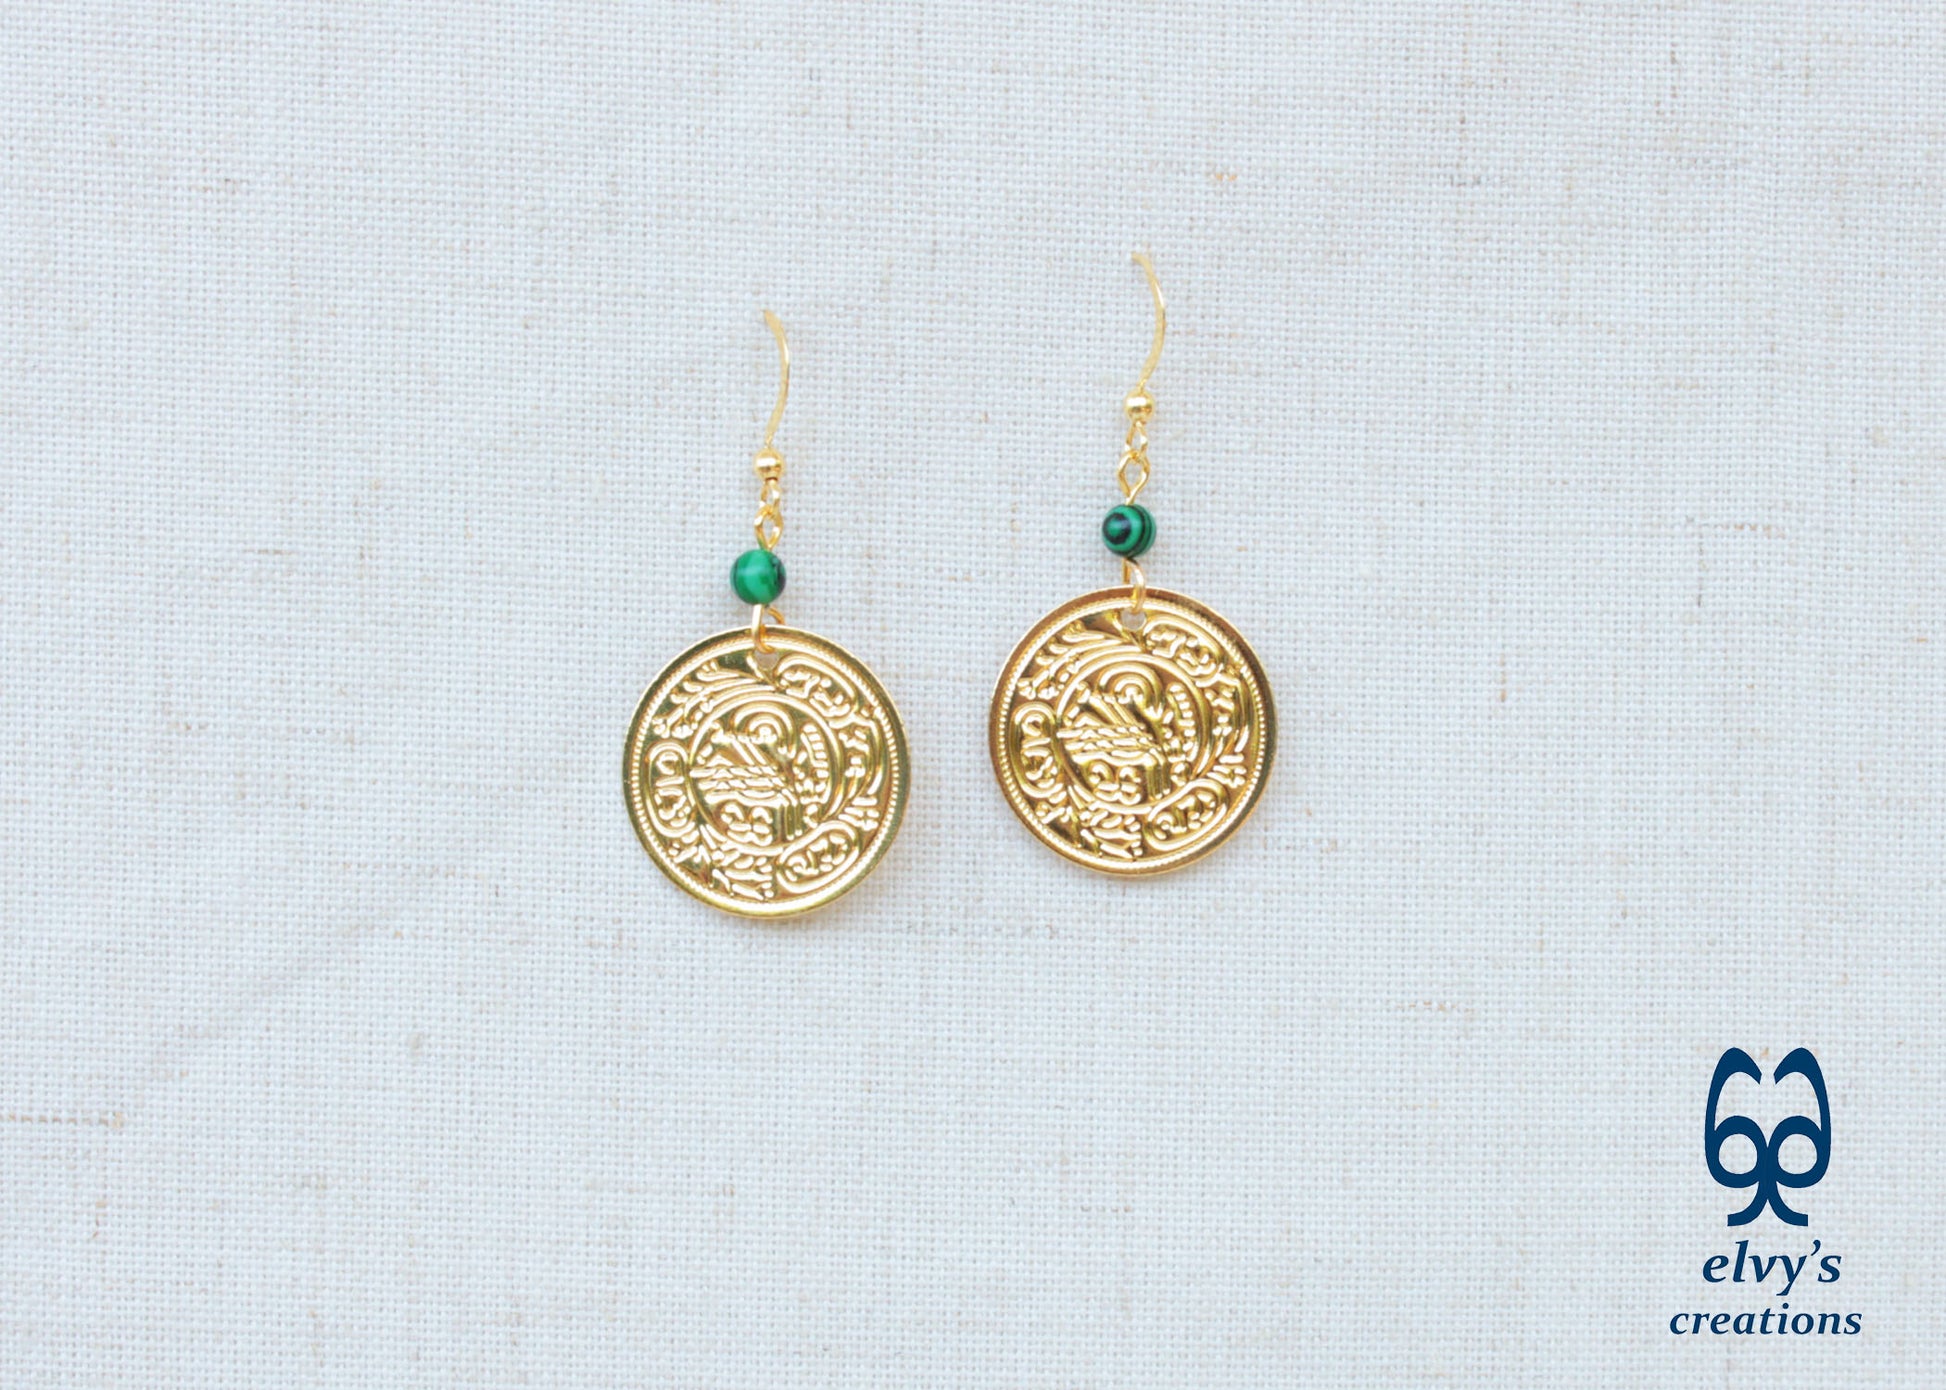 Gold Folklore Earrings Coin Dangle Drop Greek Traditional Jewelry 925 Sterling Silver Gold Plated Gypsy Jewelry Green Malachite Gemstone